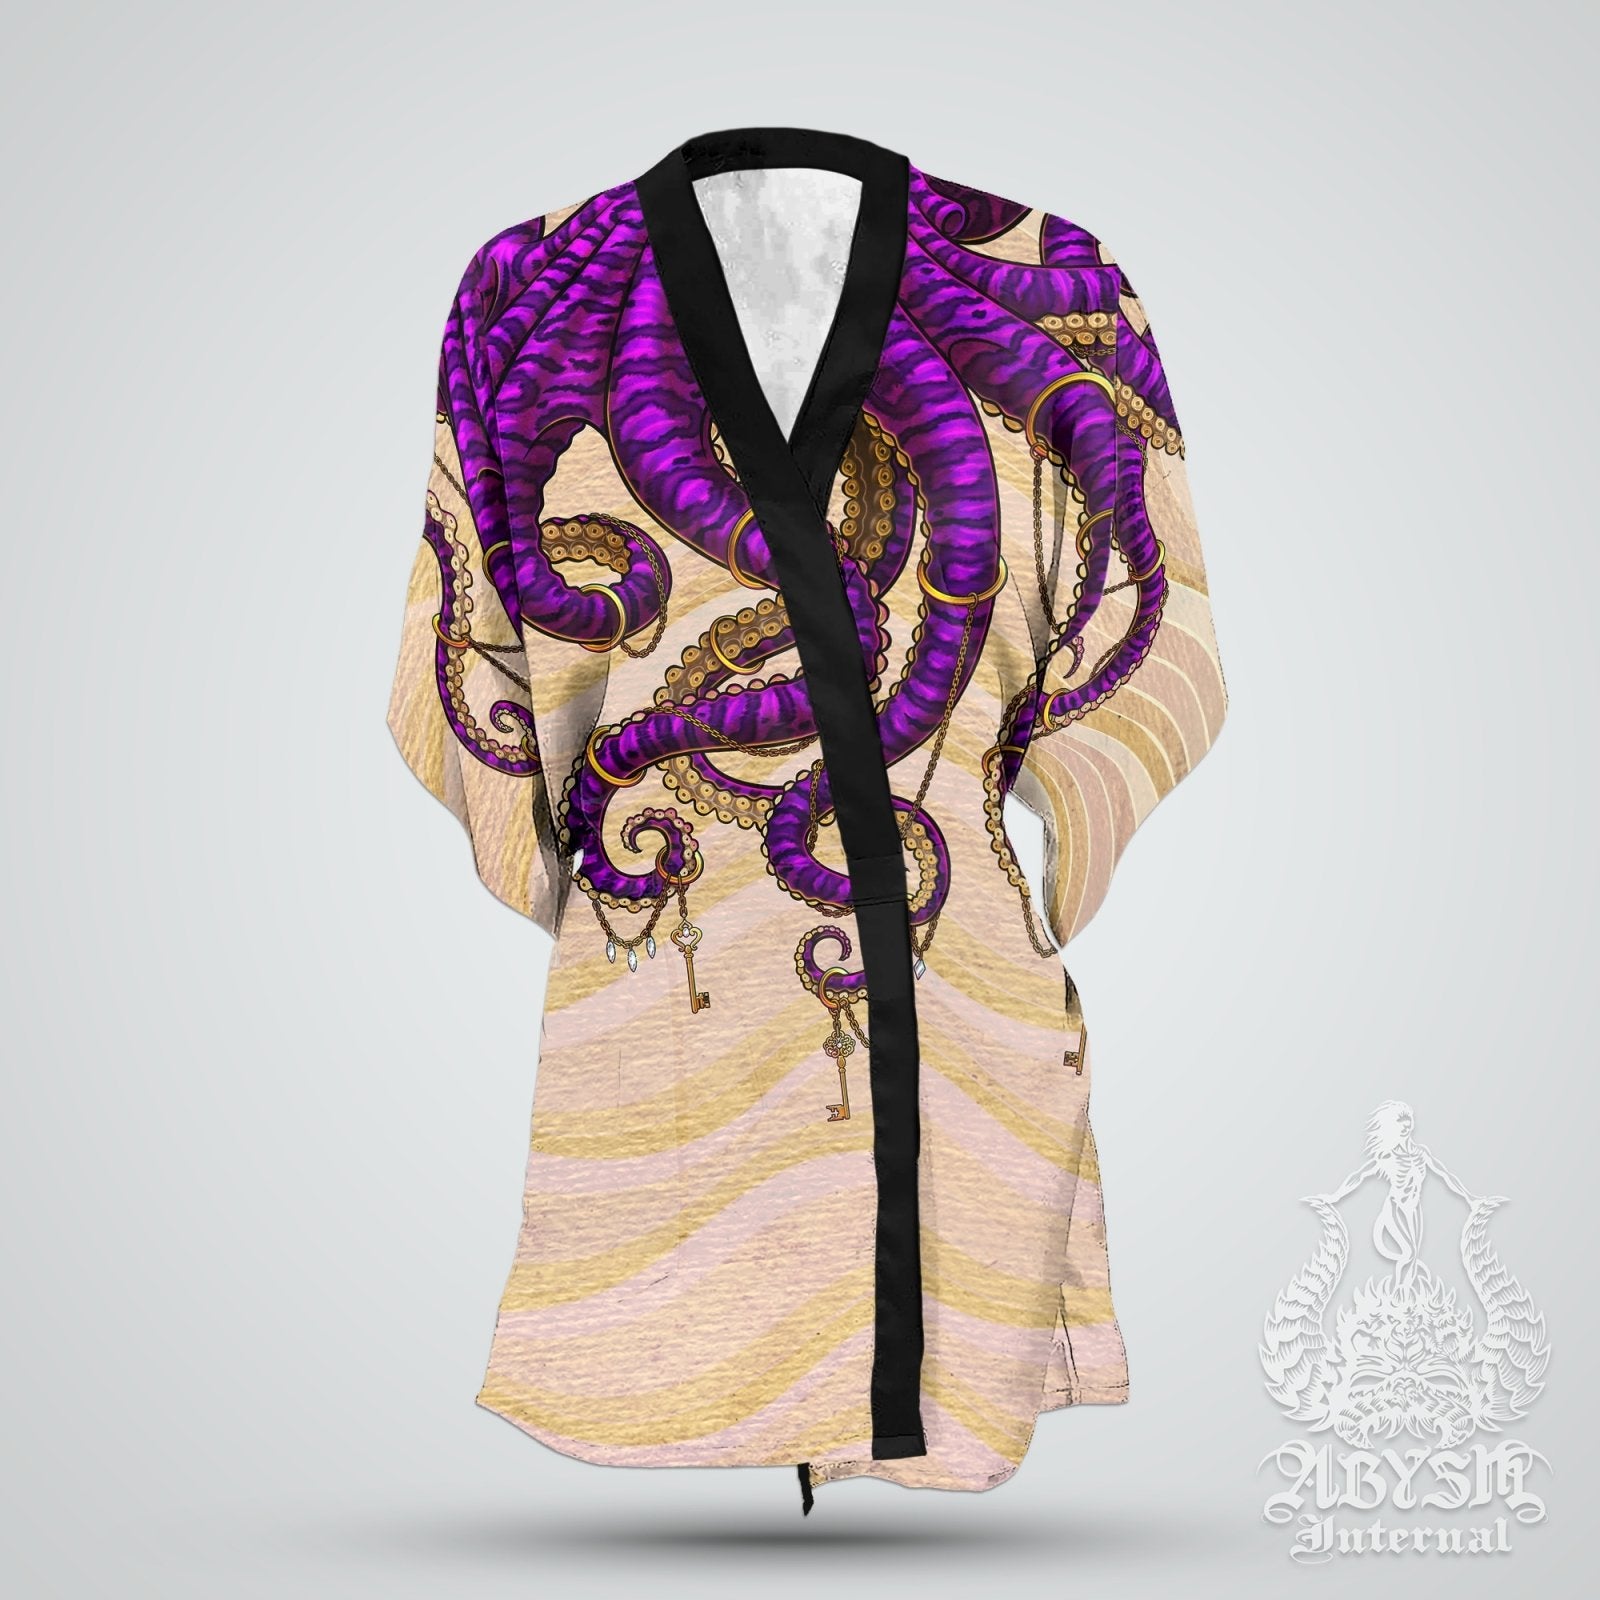 Beach Cover Up, Beach Outfit, Octopus Party Kimono, Summer Festival Robe, Indie and Alternative Clothing, Unisex - Sand Purple - Abysm Internal